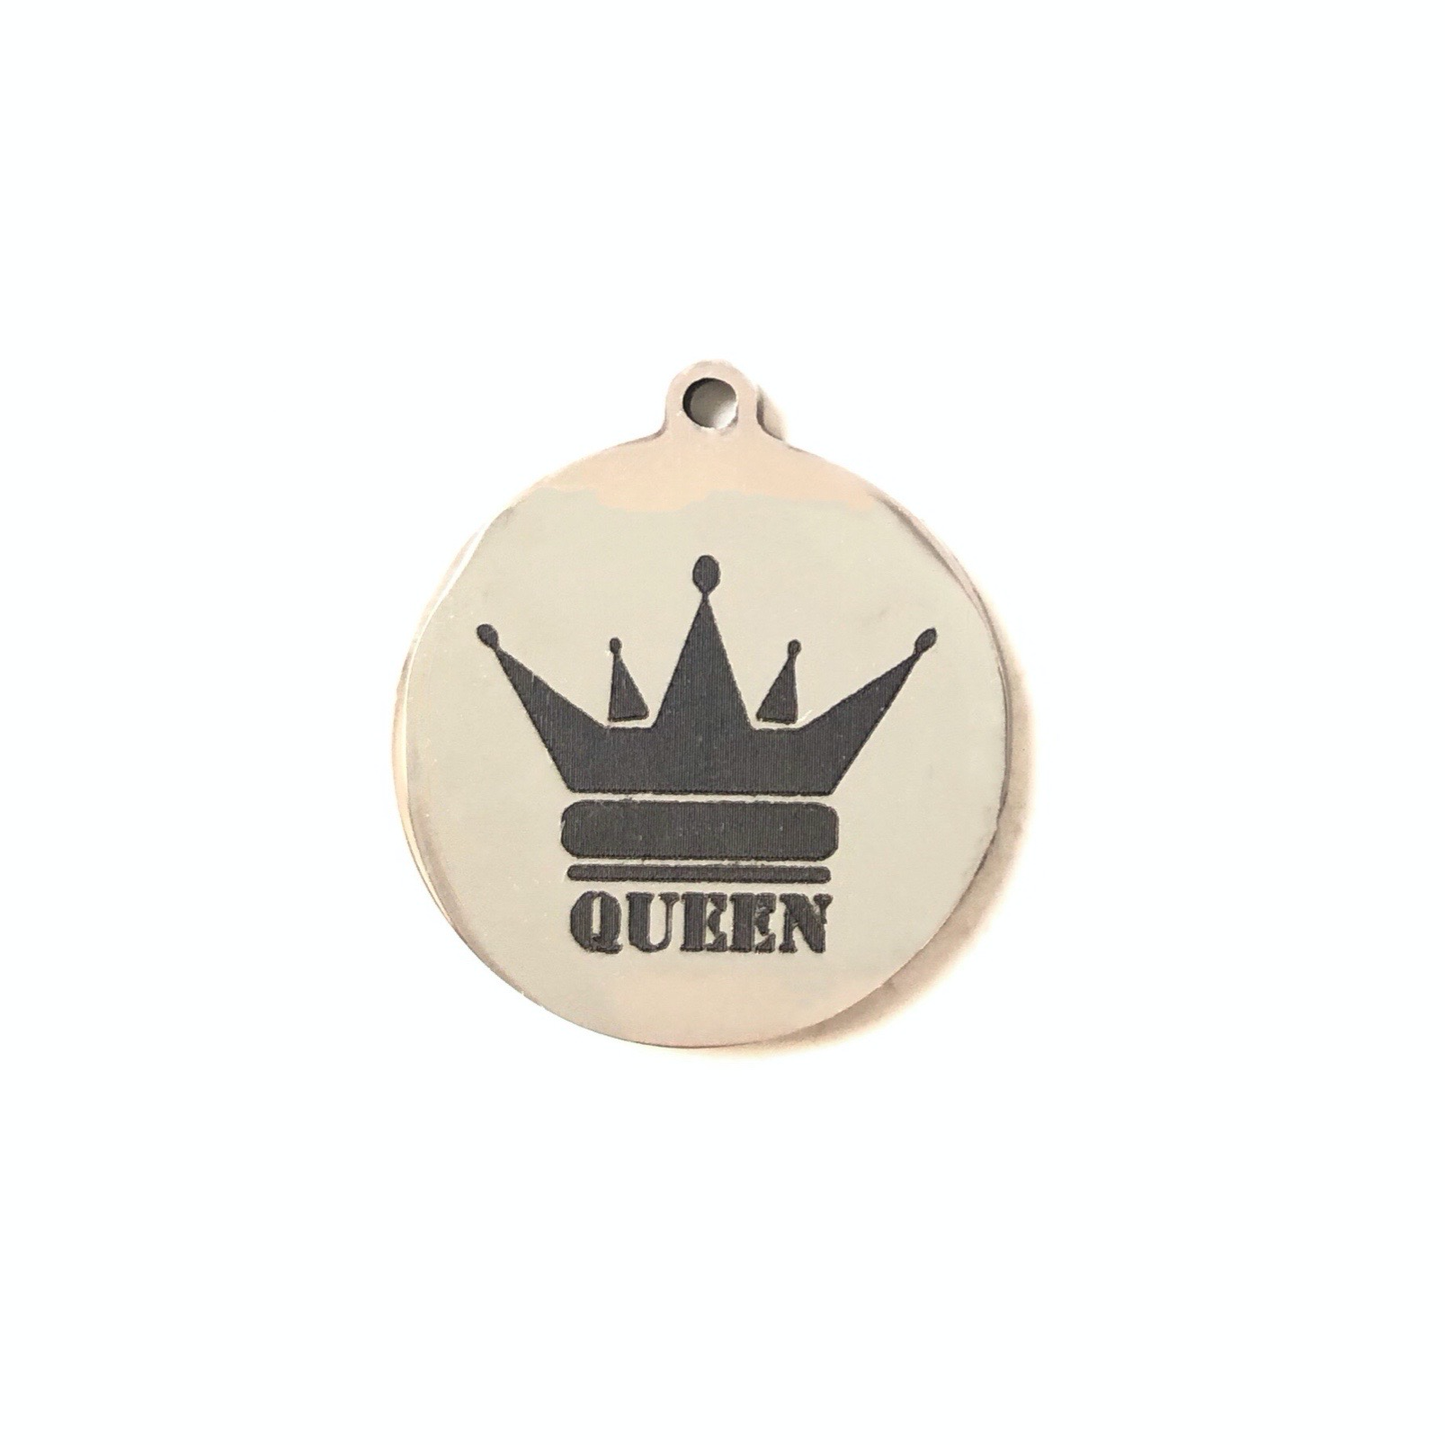 10pcs/lot 20mm Queen Crown Laser Engraved Stainless Steel Charm Silver Stainless Steel Charms On Sale Charms Beads Beyond